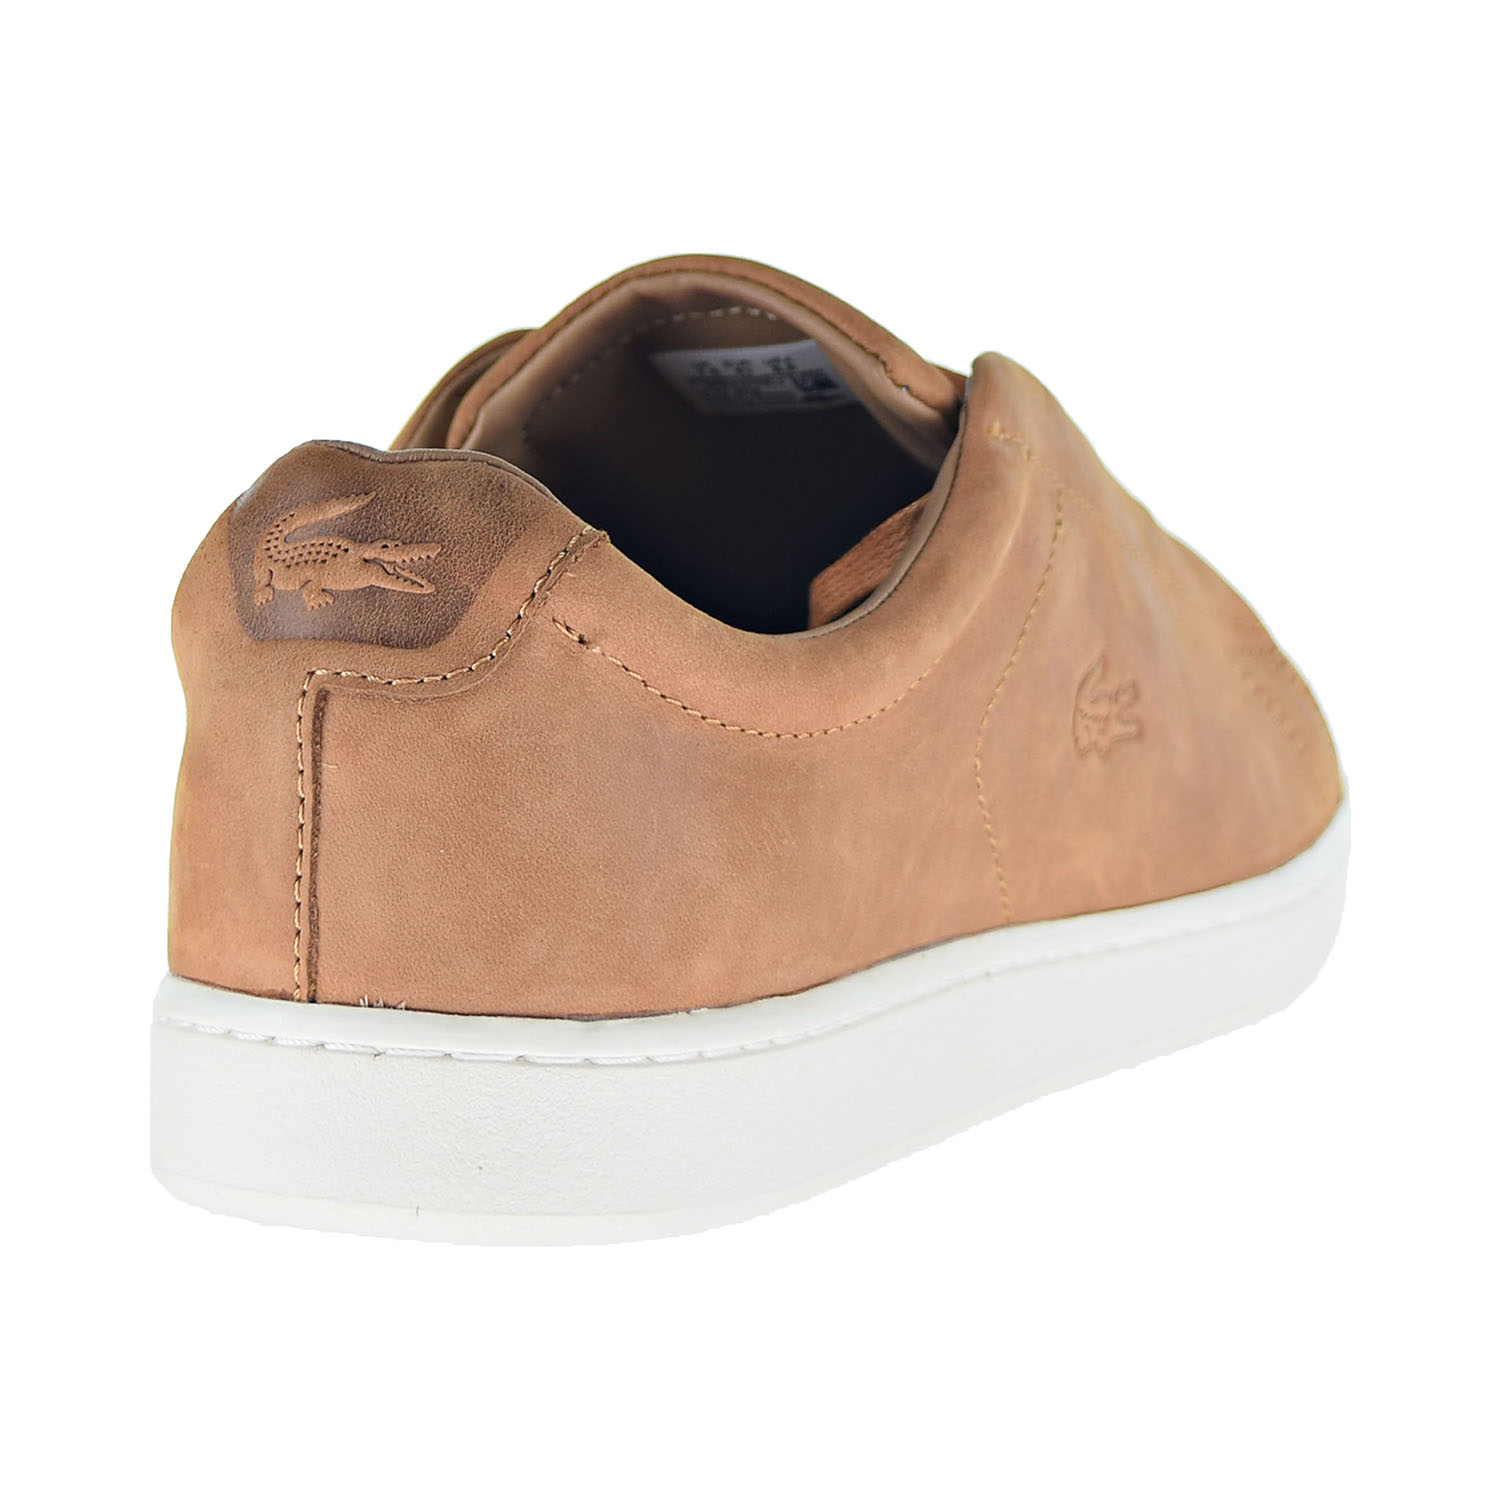 Lacoste Carnaby Evo Easy 319 1 SMA Men's Shoes Brown/Off White 7-38sma0015-2c3 - image 3 of 6